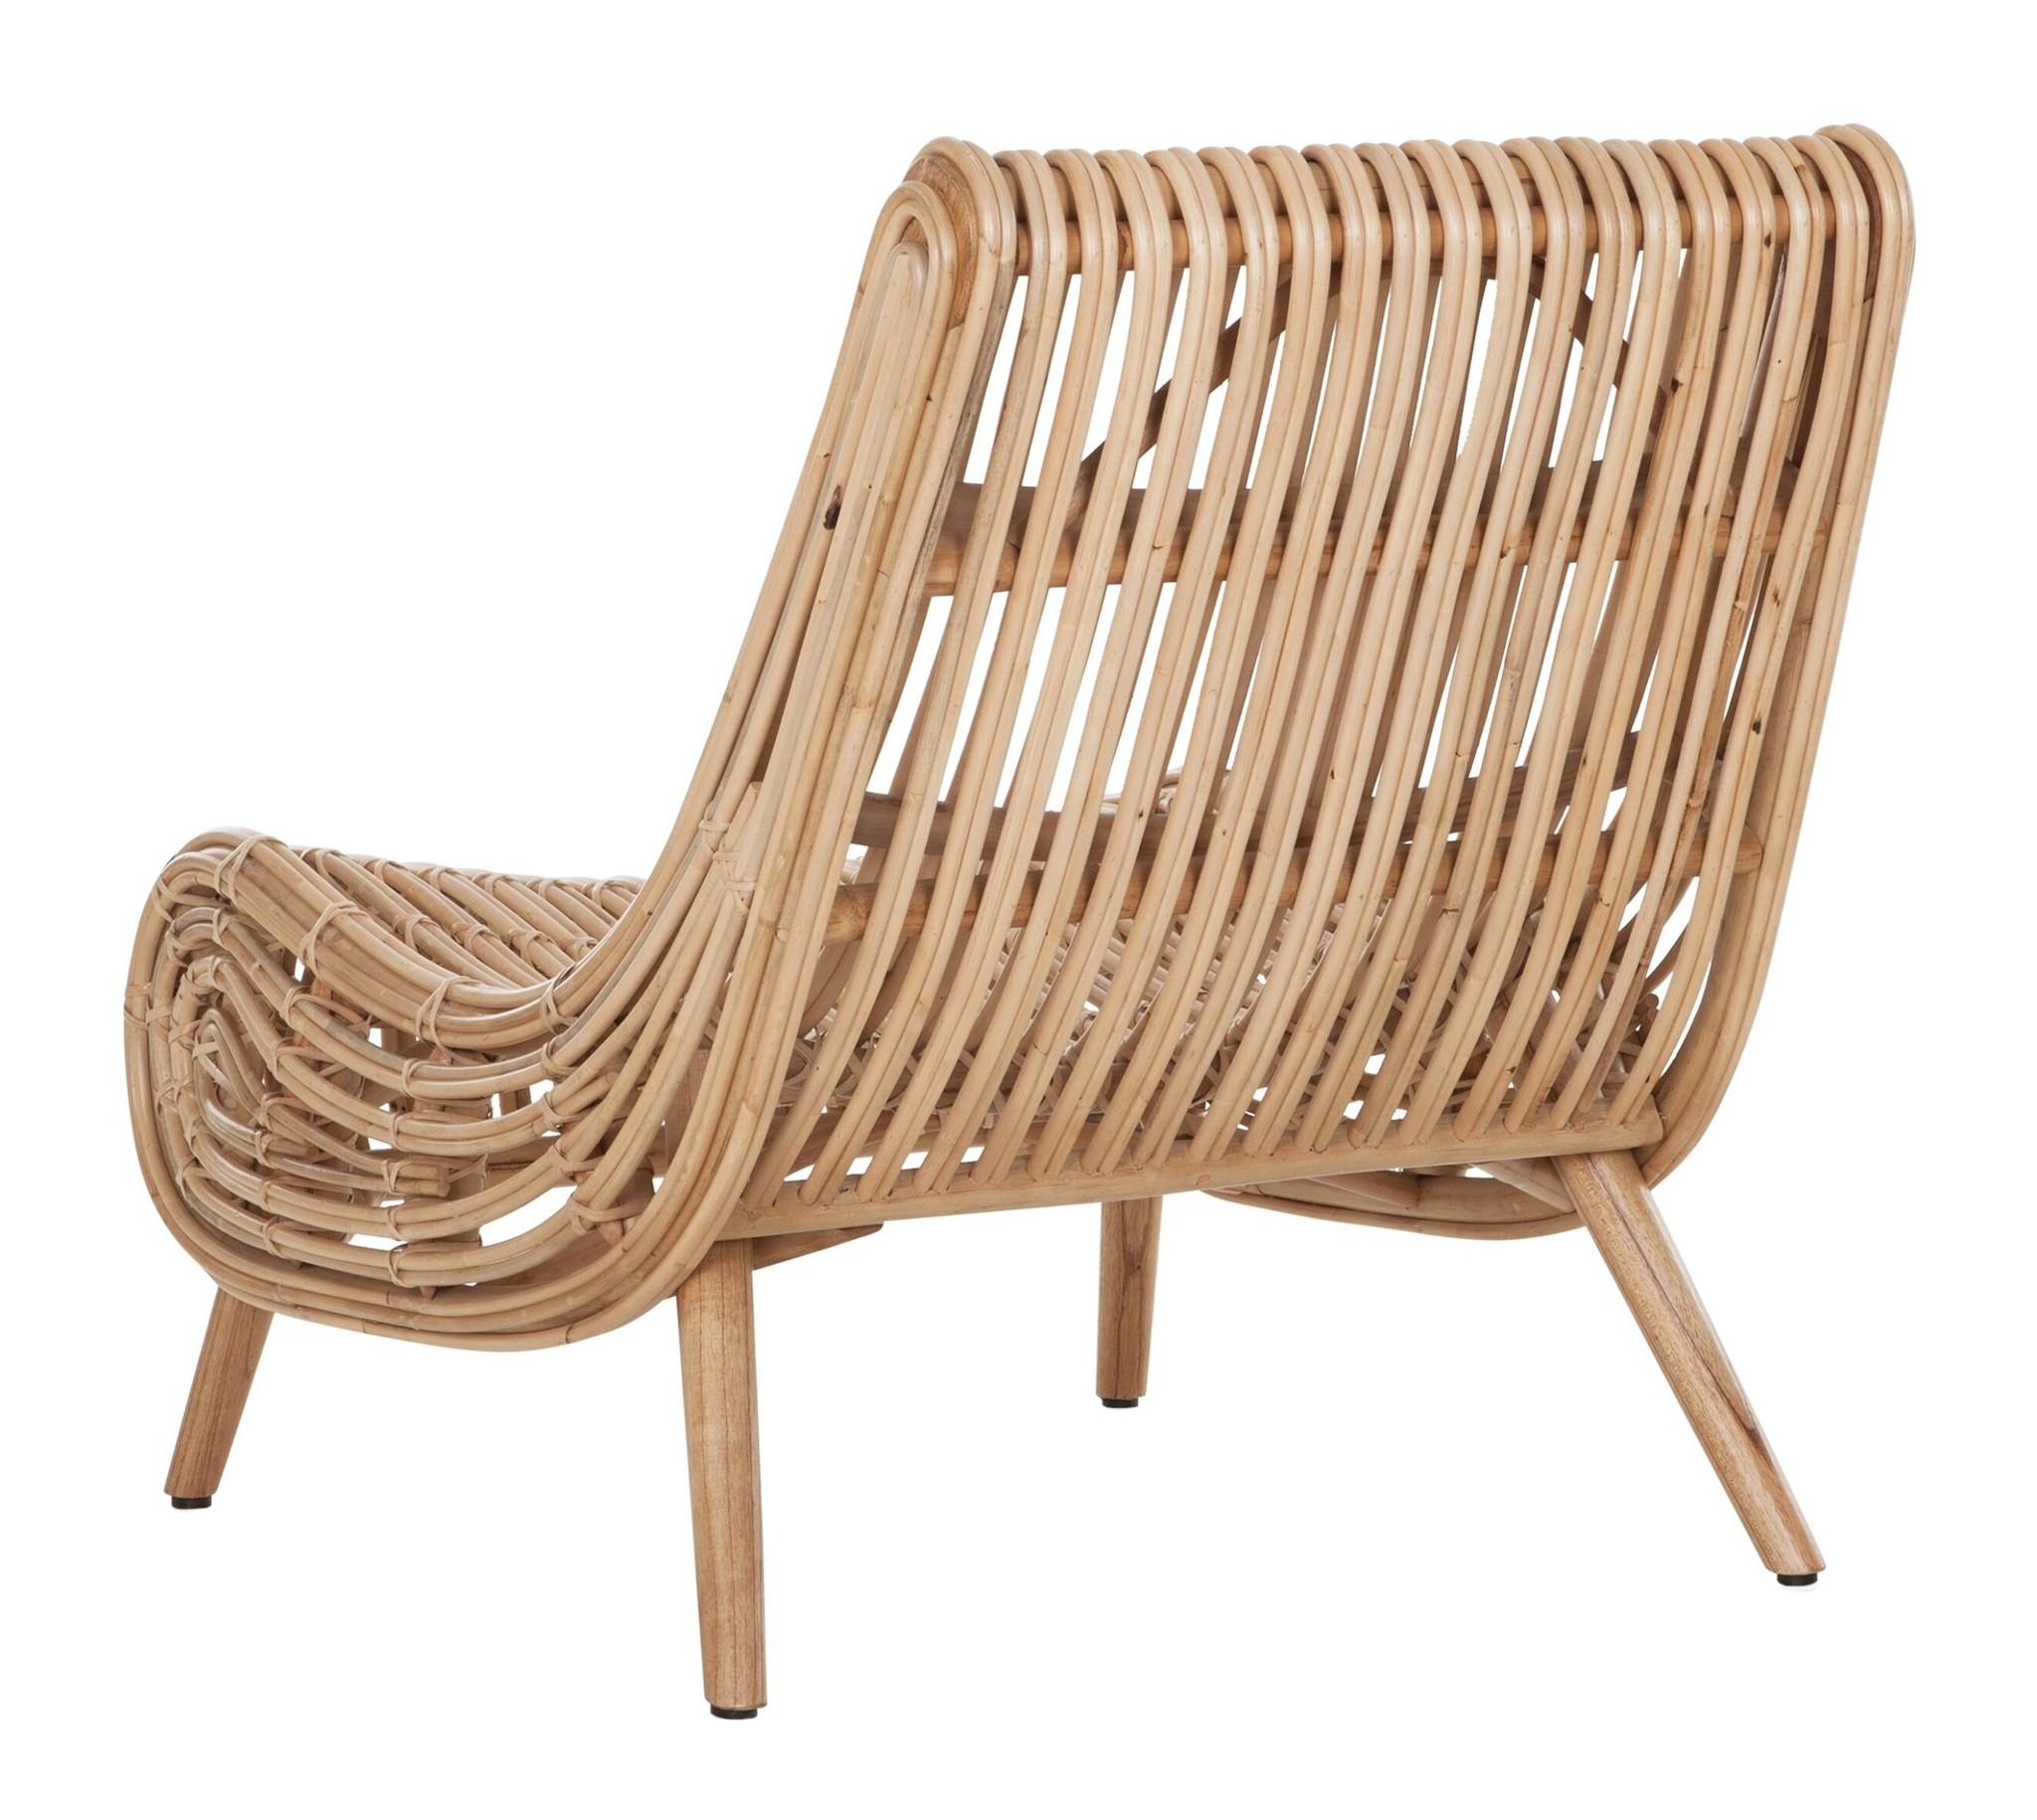 Petite Lily Interiors Rattan lounge chair - Natural - 78x74x94cm